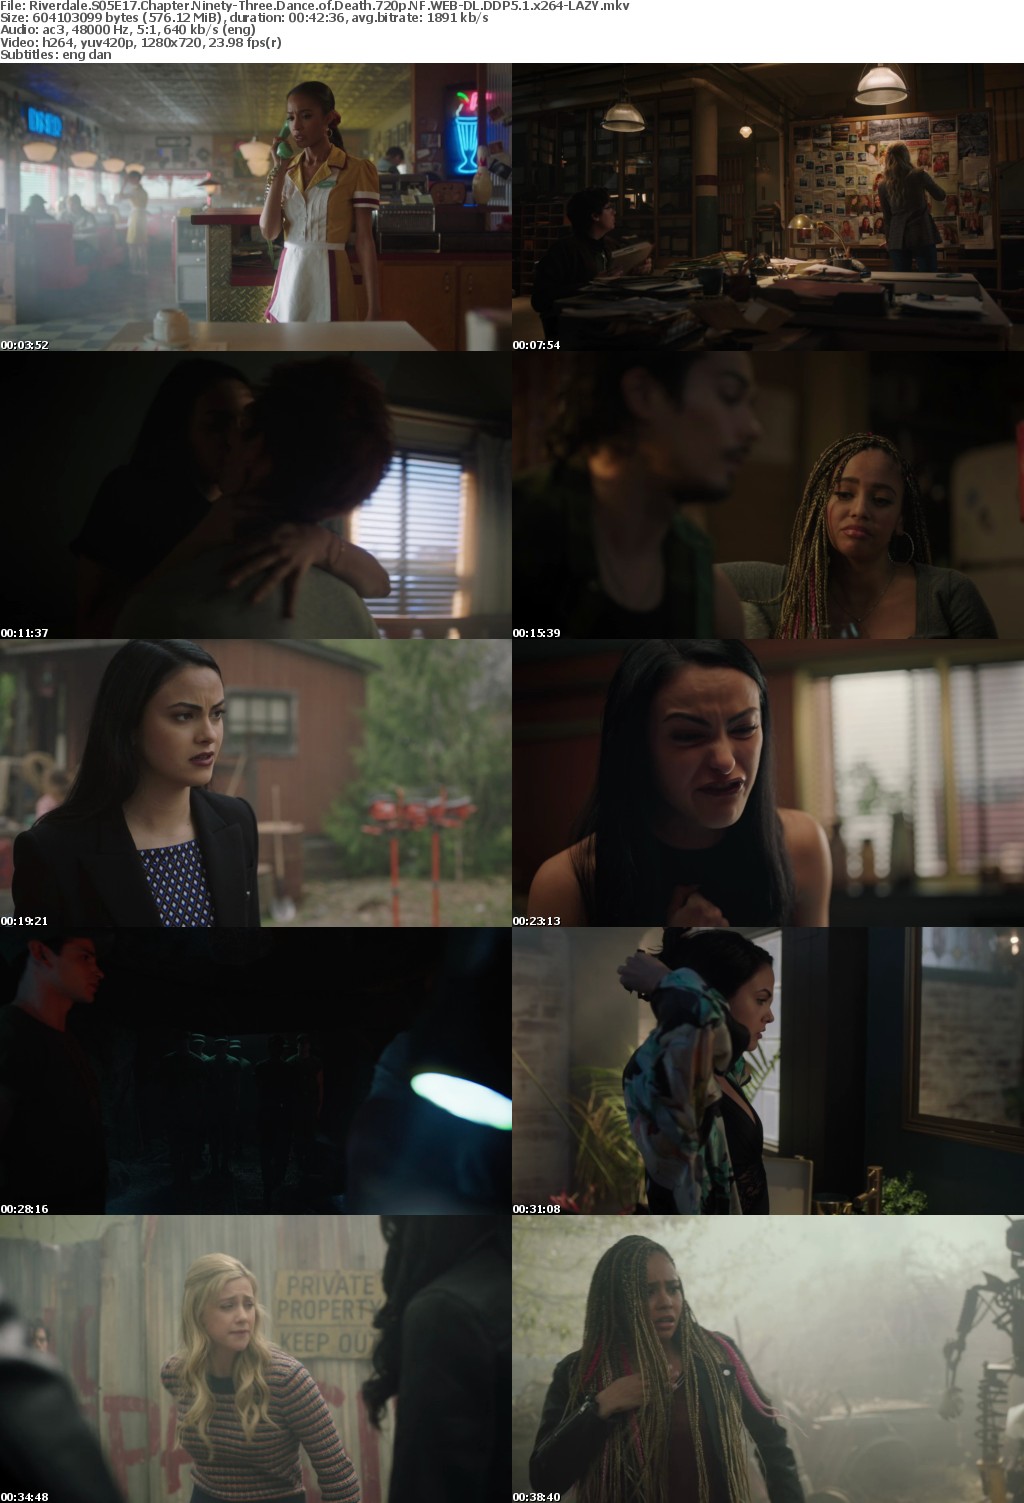 Riverdale US S05E17 Chapter Ninety-Three Dance of Death 720p NF WEBRip DDP5 1 x264-LAZY